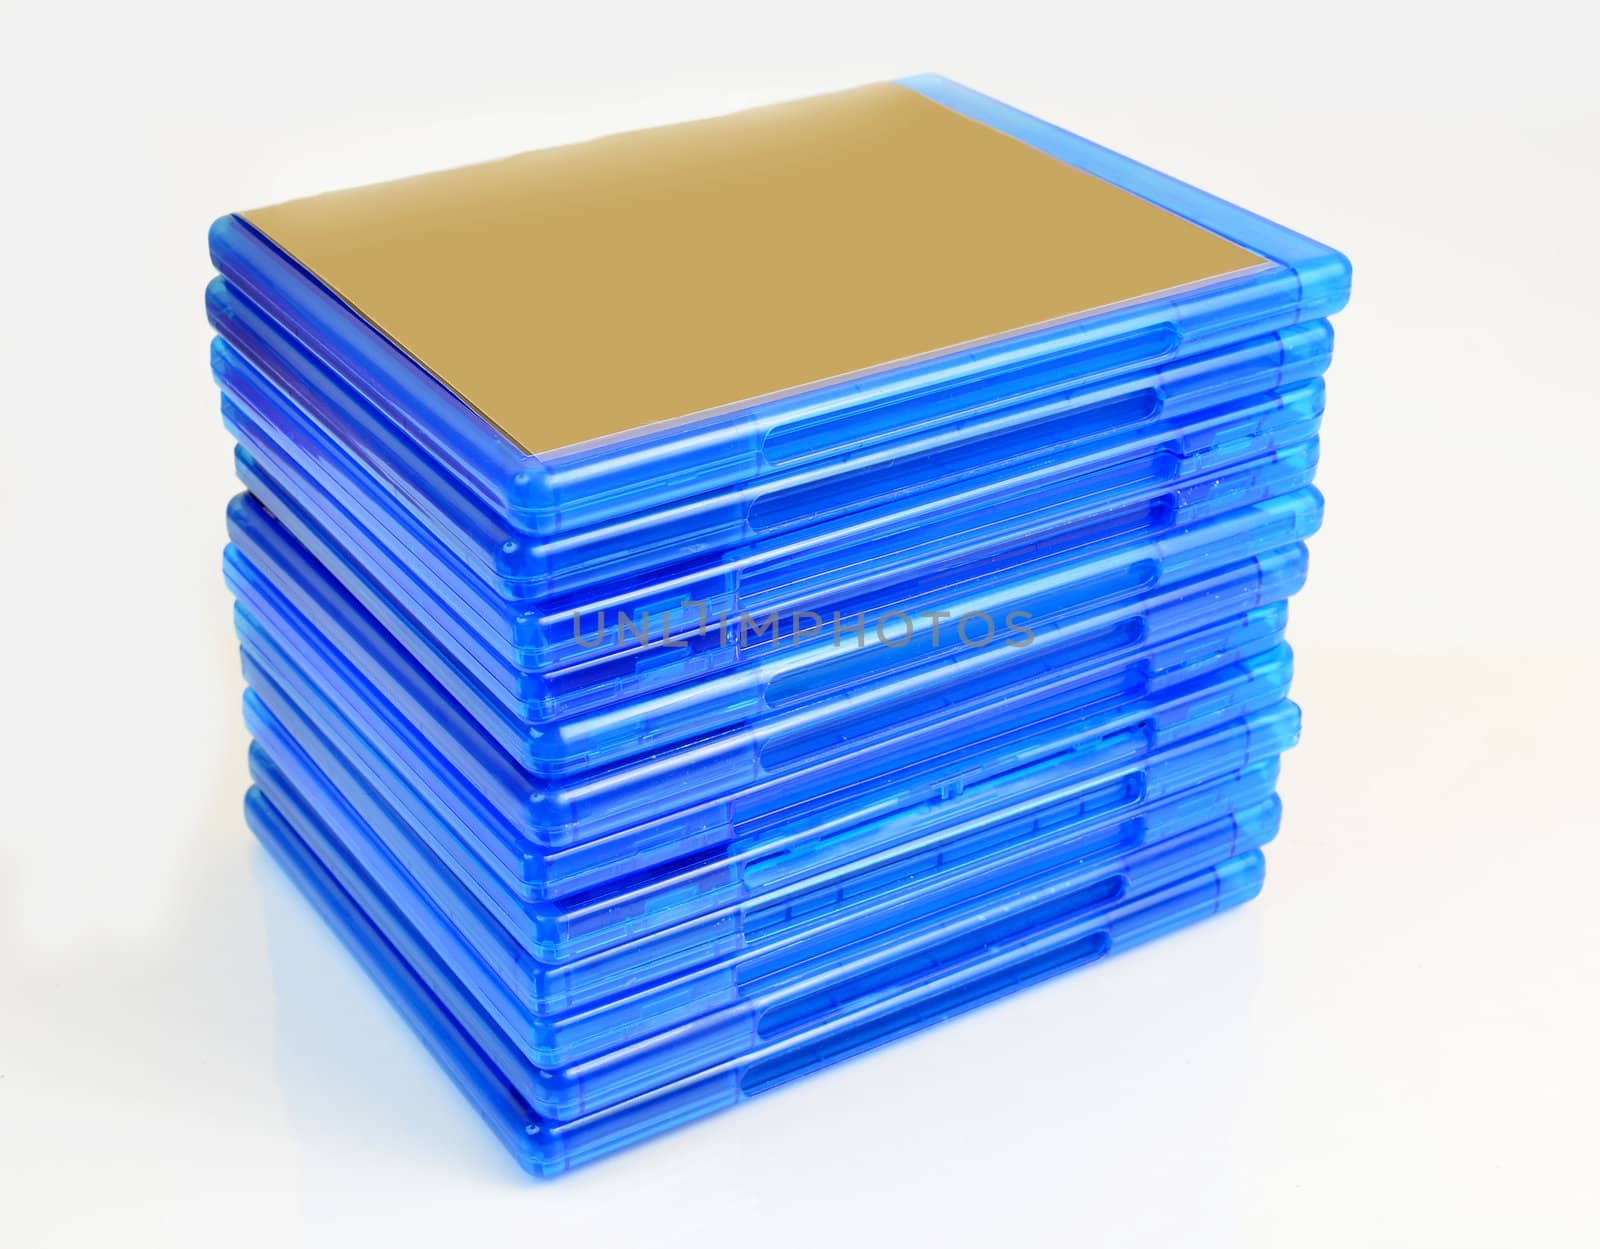 Blu Ray boxes stack by artofphoto